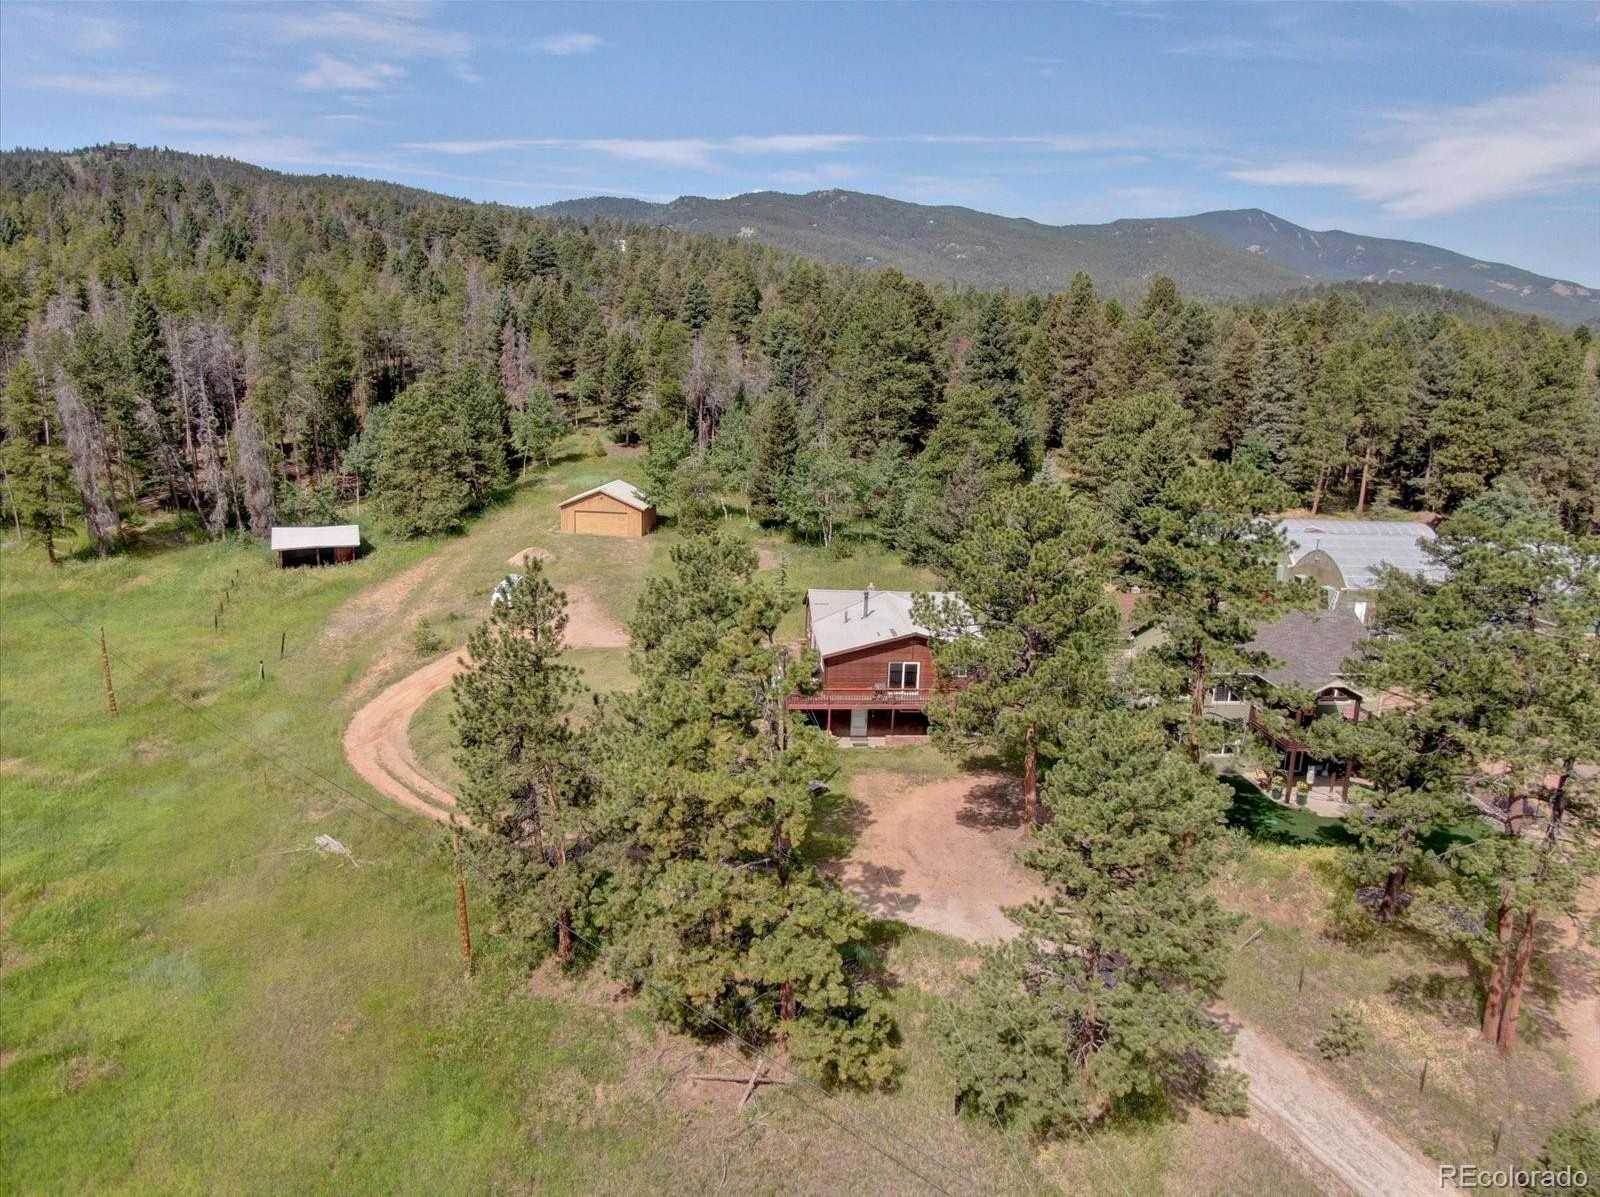 View Conifer, CO 80433 house